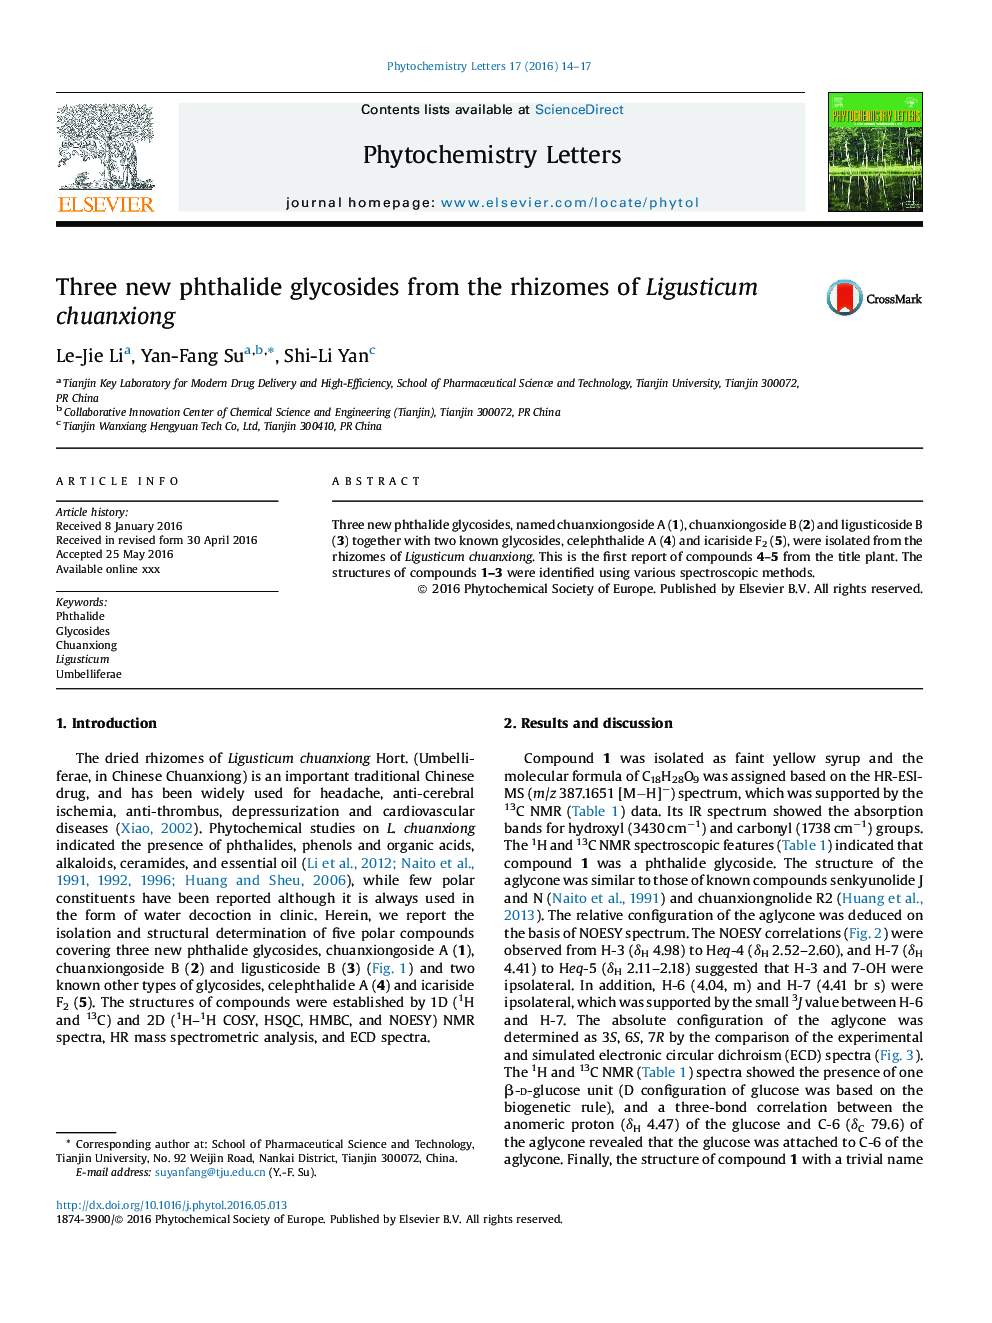 Three new phthalide glycosides from the rhizomes of Ligusticum chuanxiong